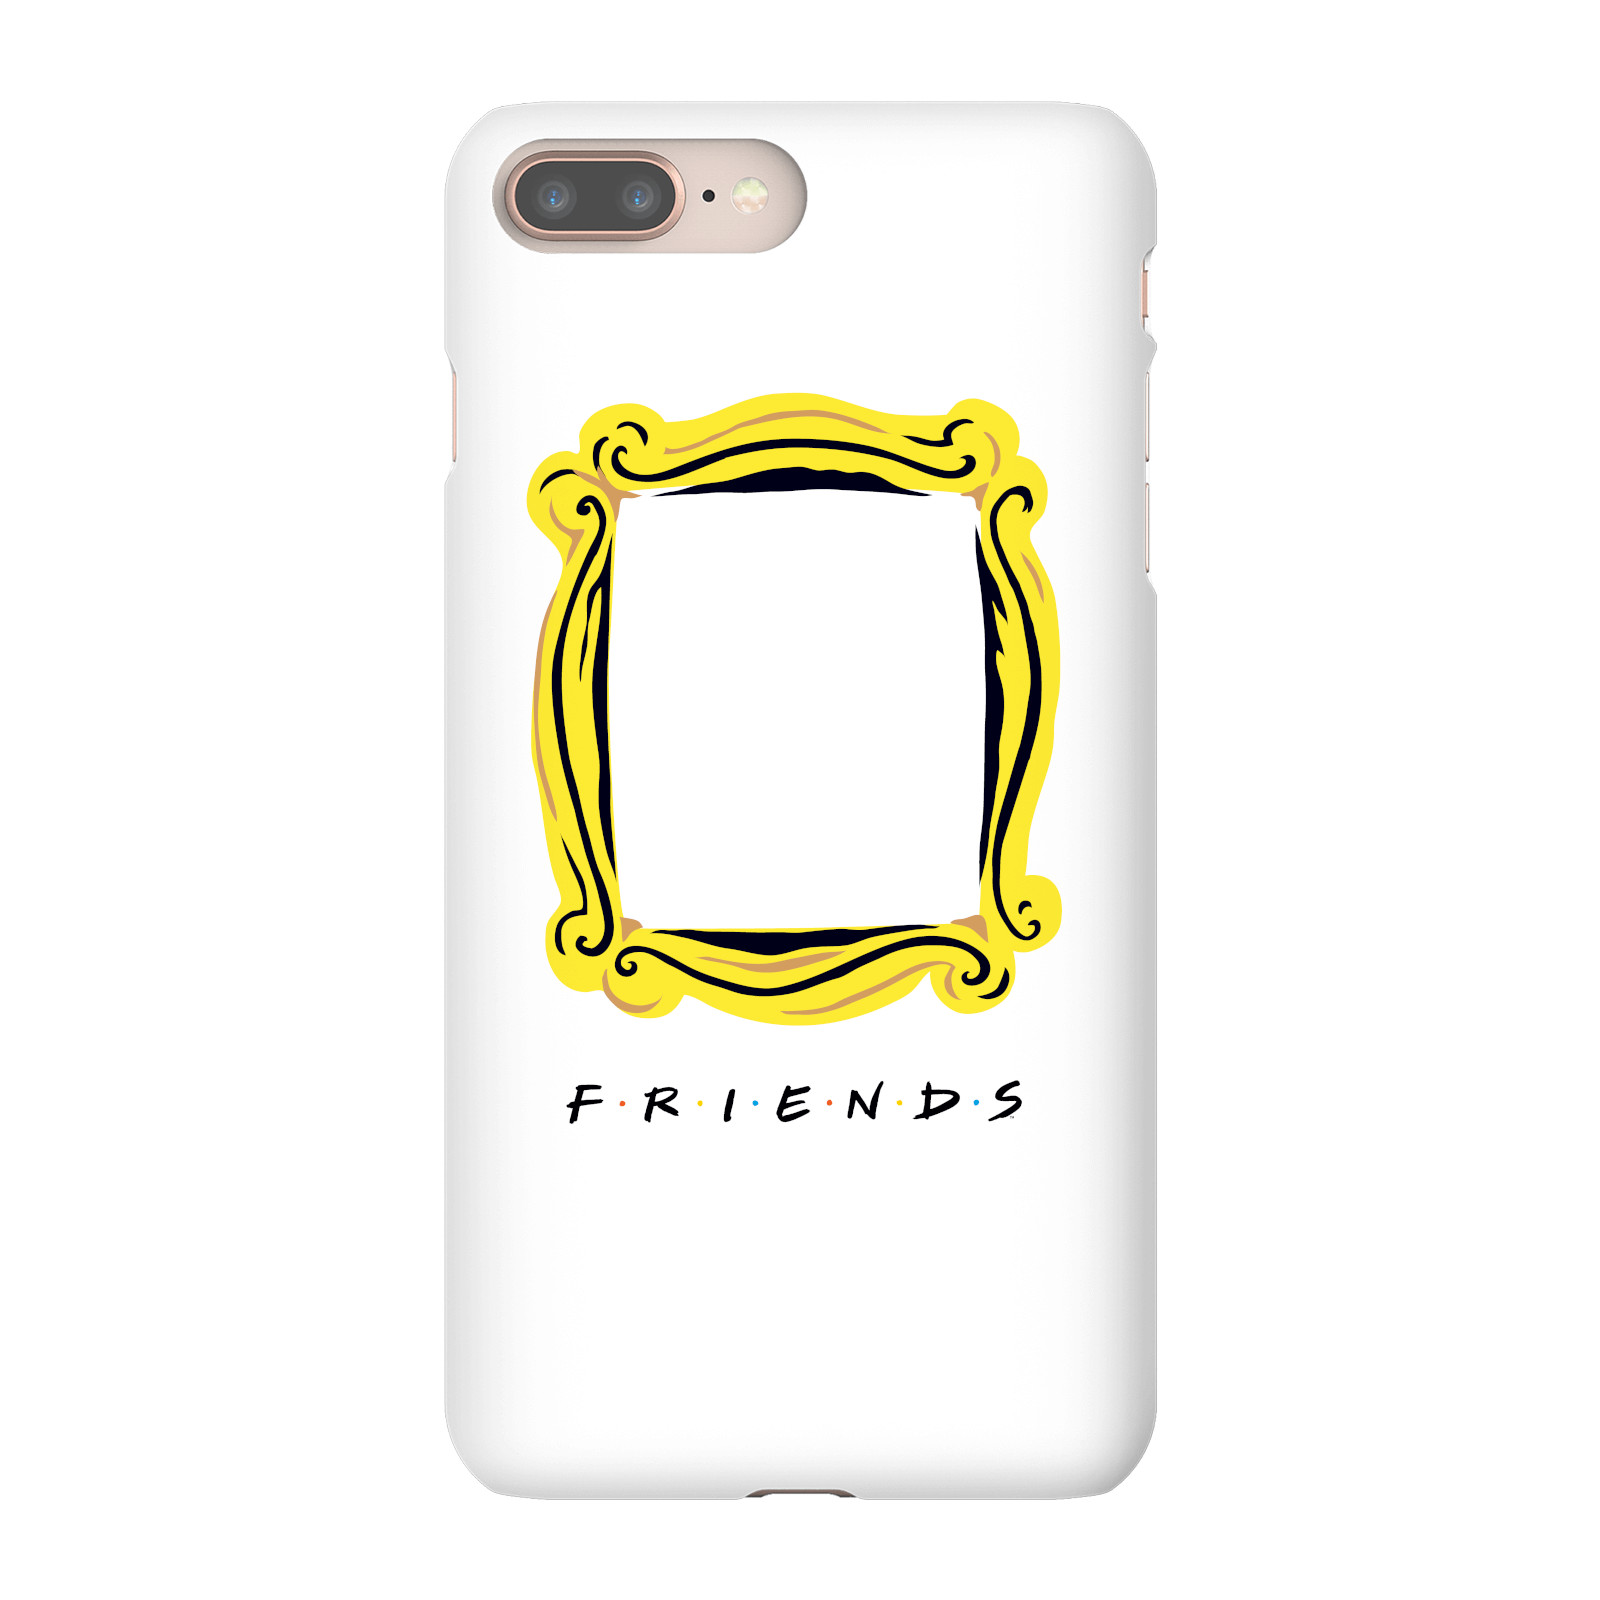 Photos - Case Frame Friends  Phone  for iPhone and Android - iPhone 7 - Tough   